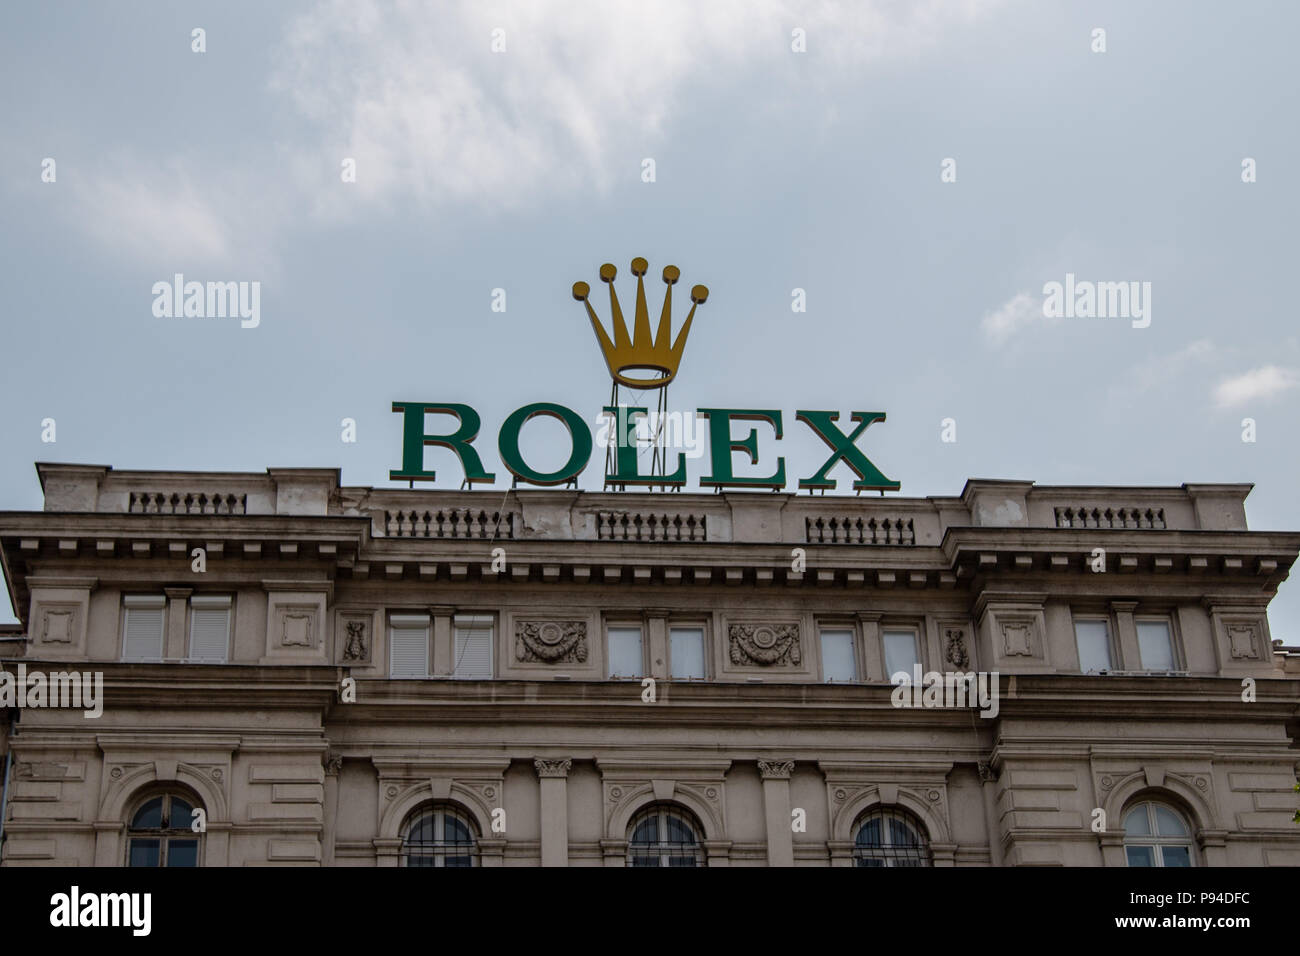 The Rolex sign on top of a building in Budapest, Hungary Stock Photo - Alamy